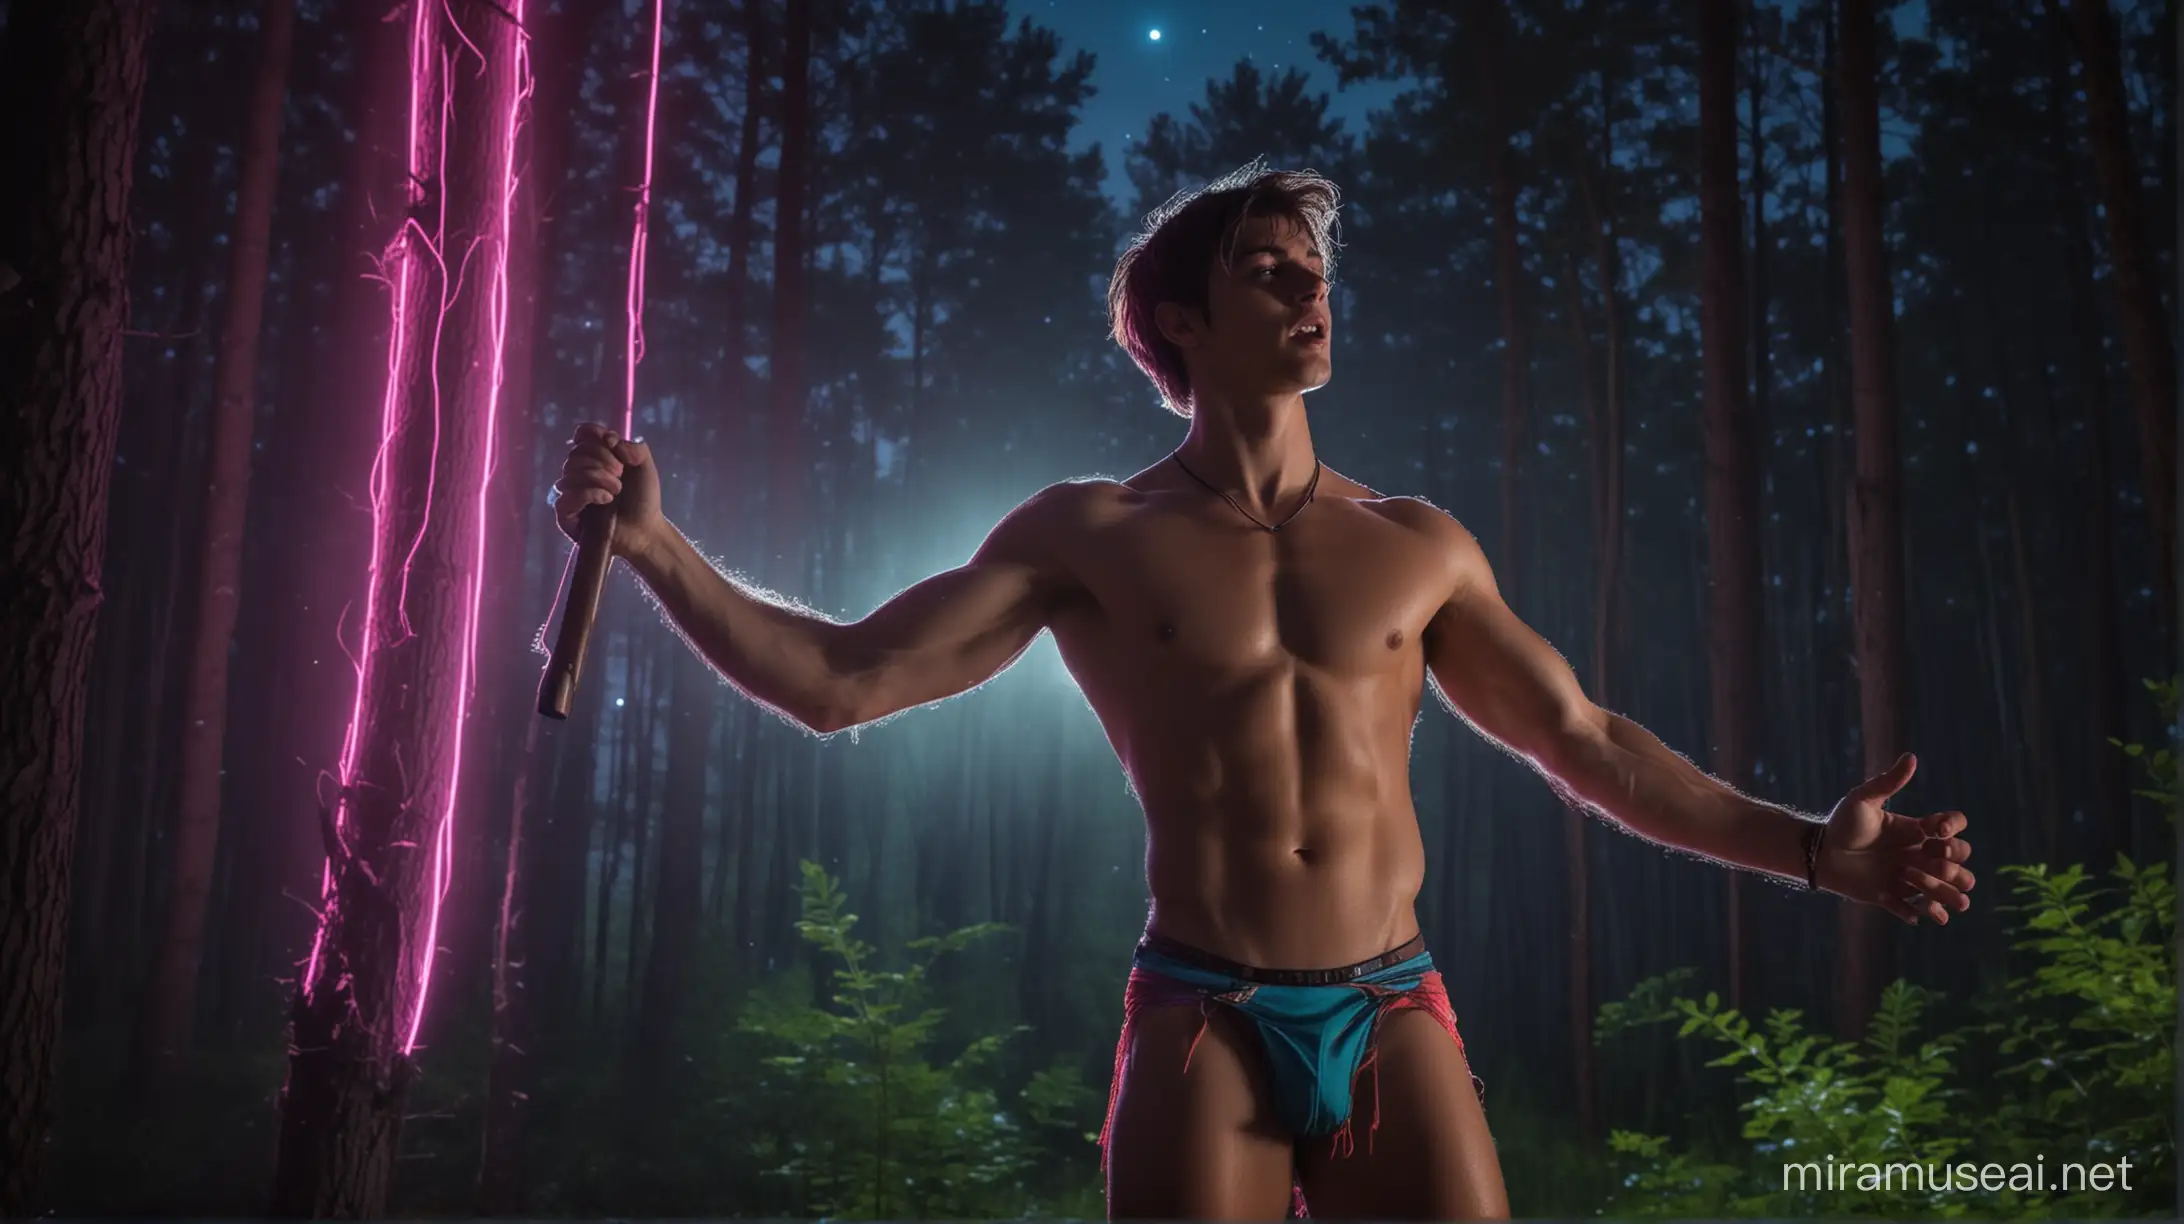 Muscular Teen Boy Singing in Neon Forest at Night